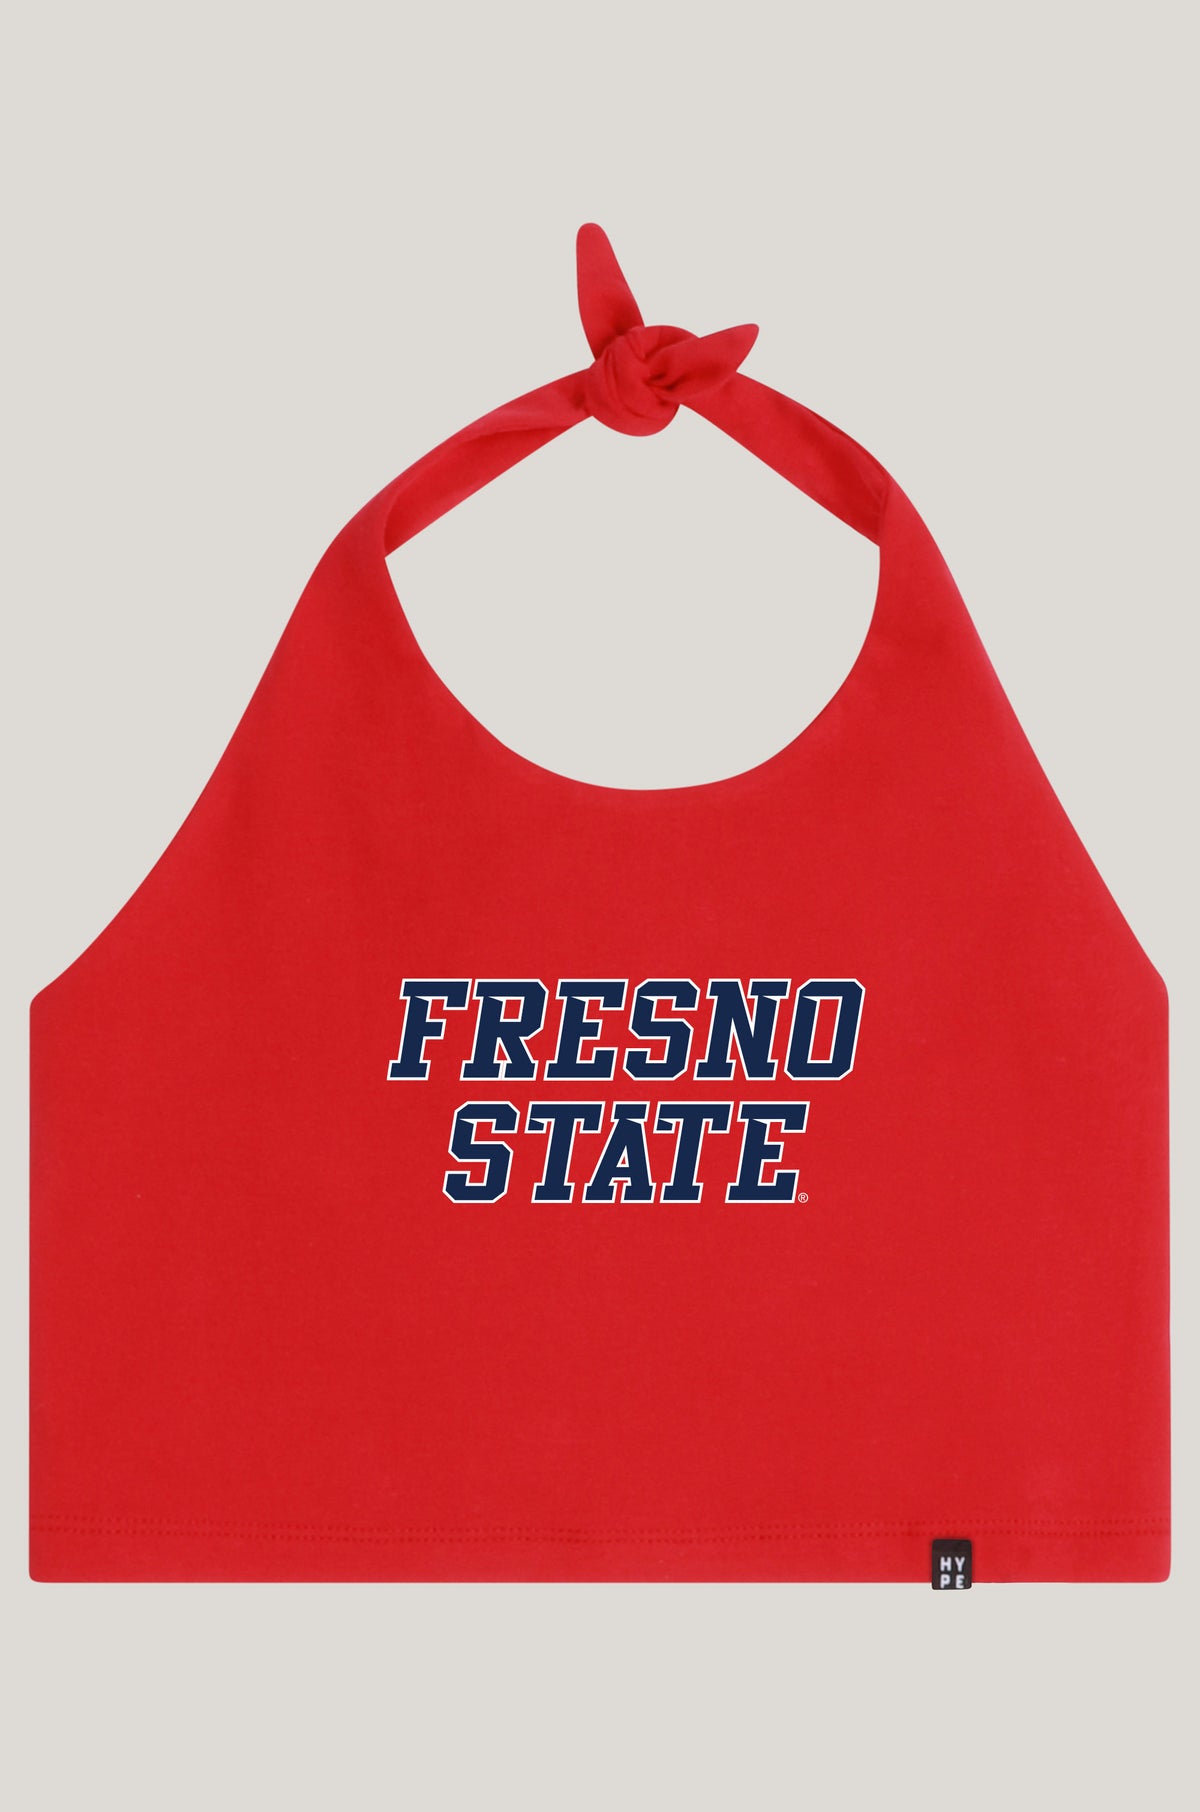 Fresno State Tailgate Top